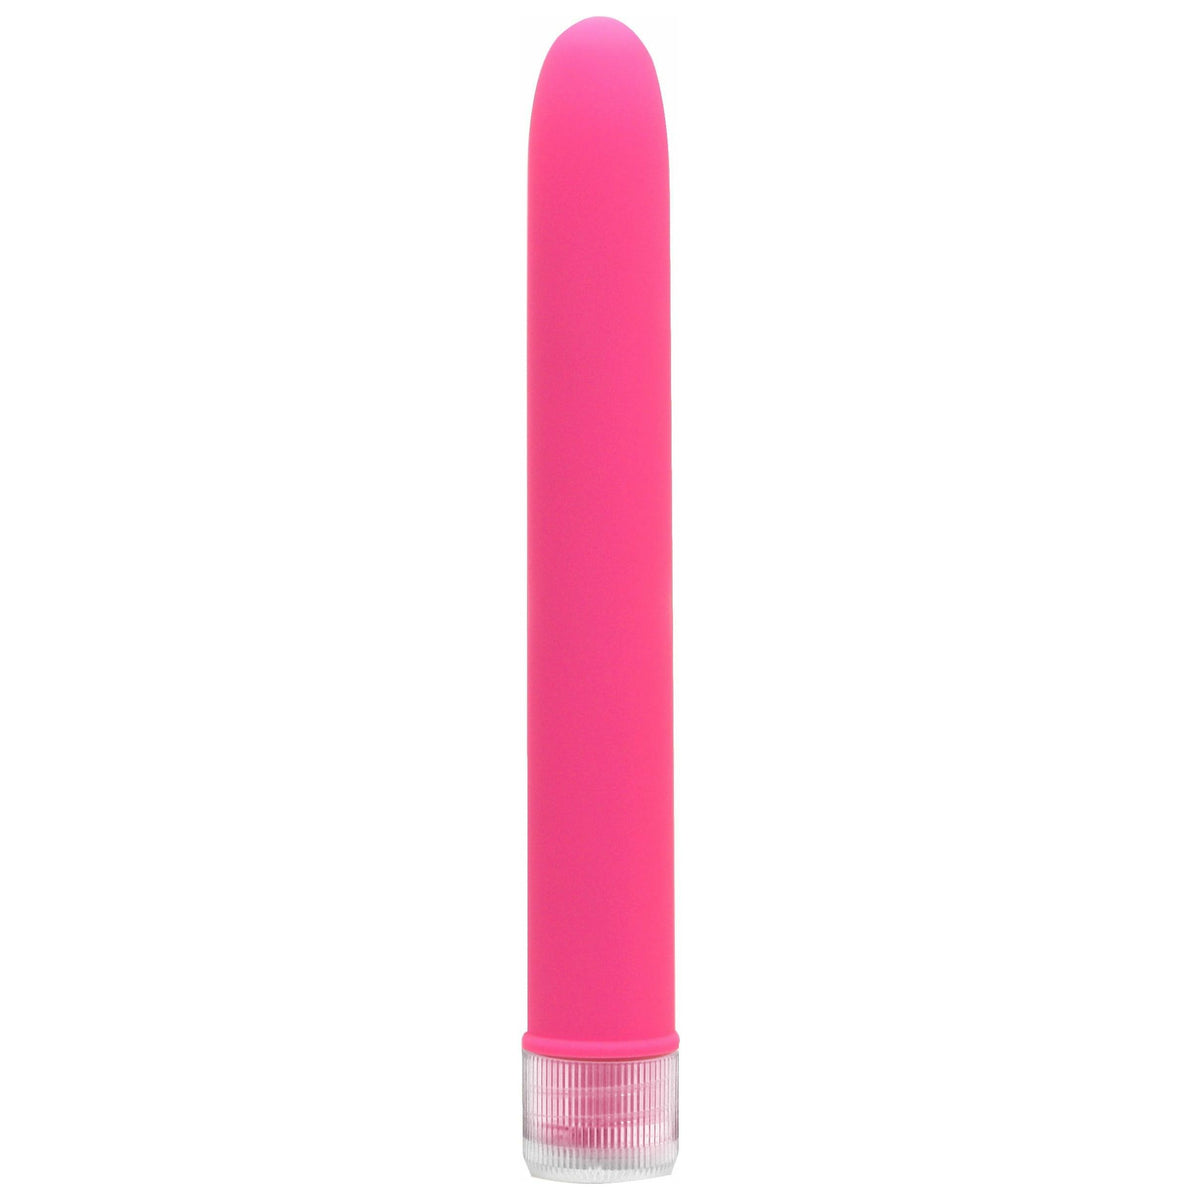 Pipedream Products Waterproof Neon Luv Touch Vibe - Pink